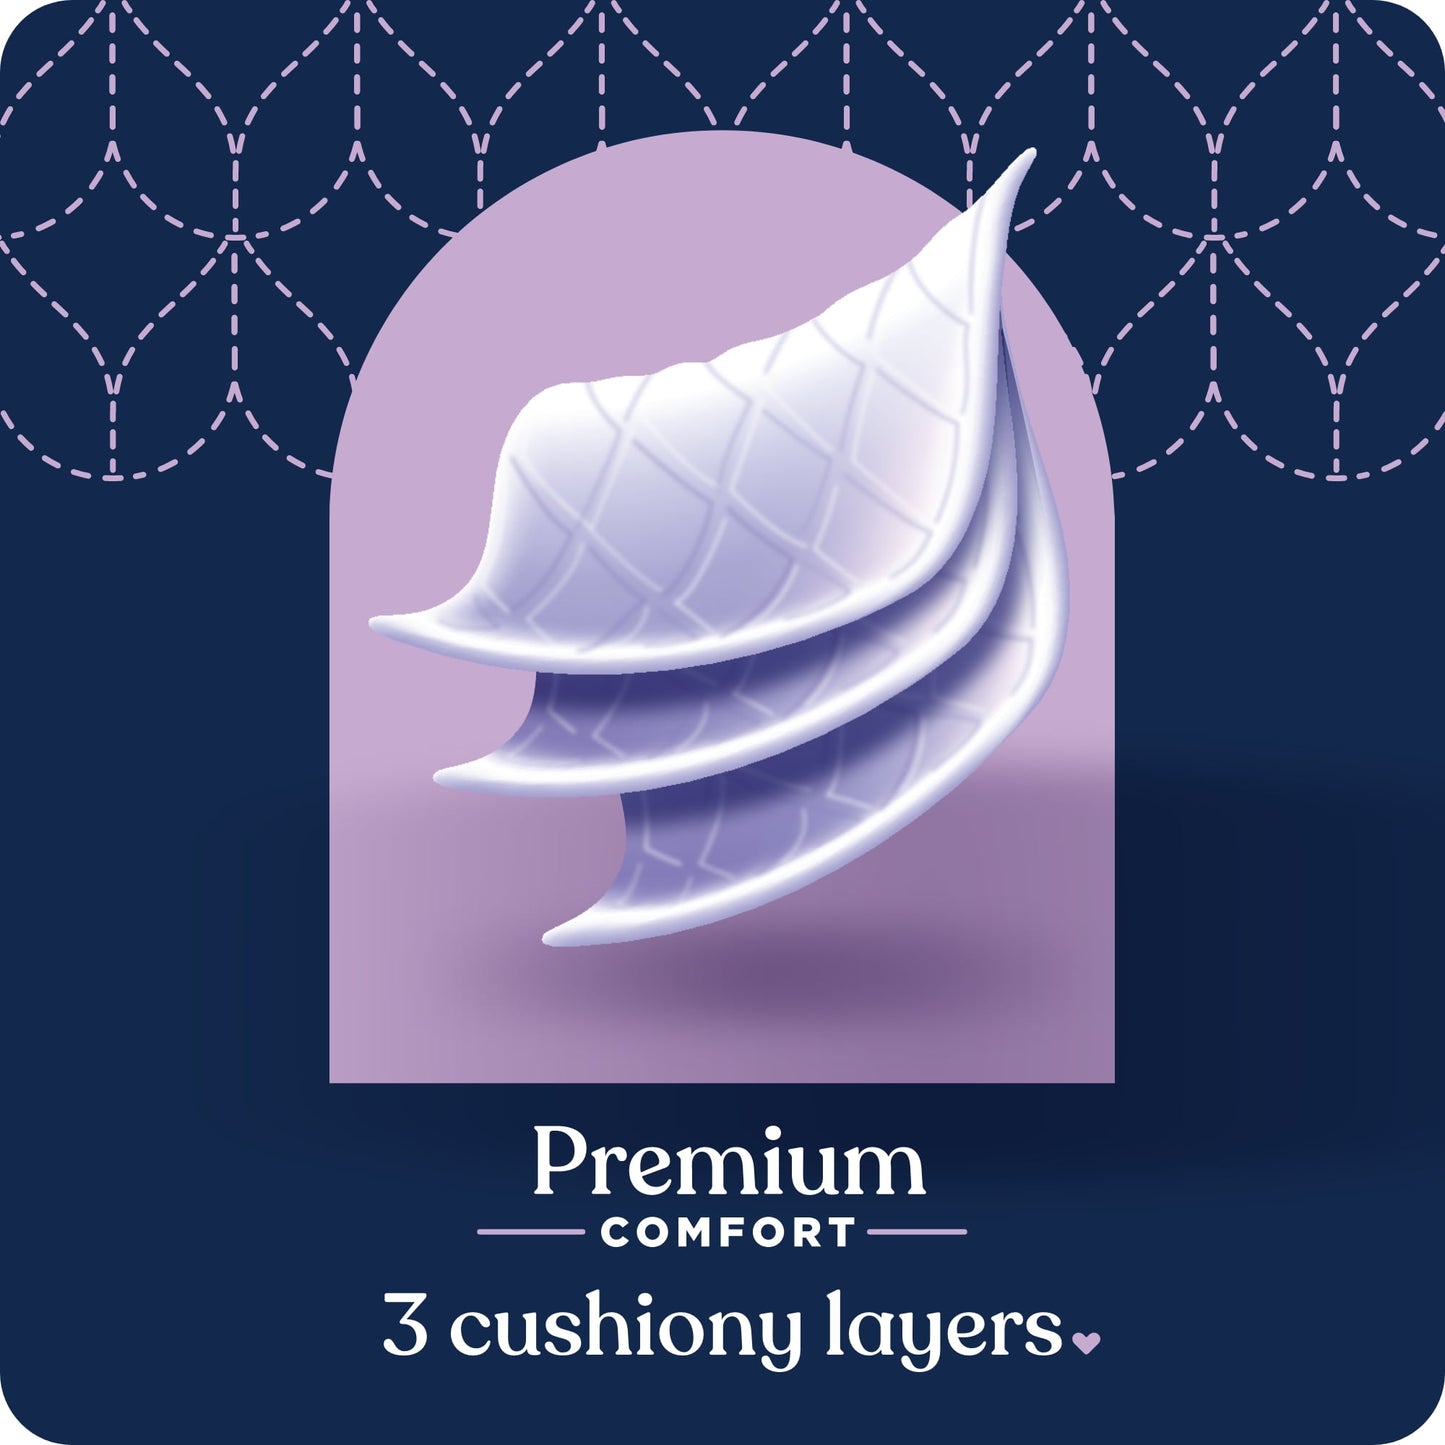 Quilted Northern Ultra Plush 6 Mega Rolls, 3X More Absorbent*, Luxurious Soft Toilet Paper